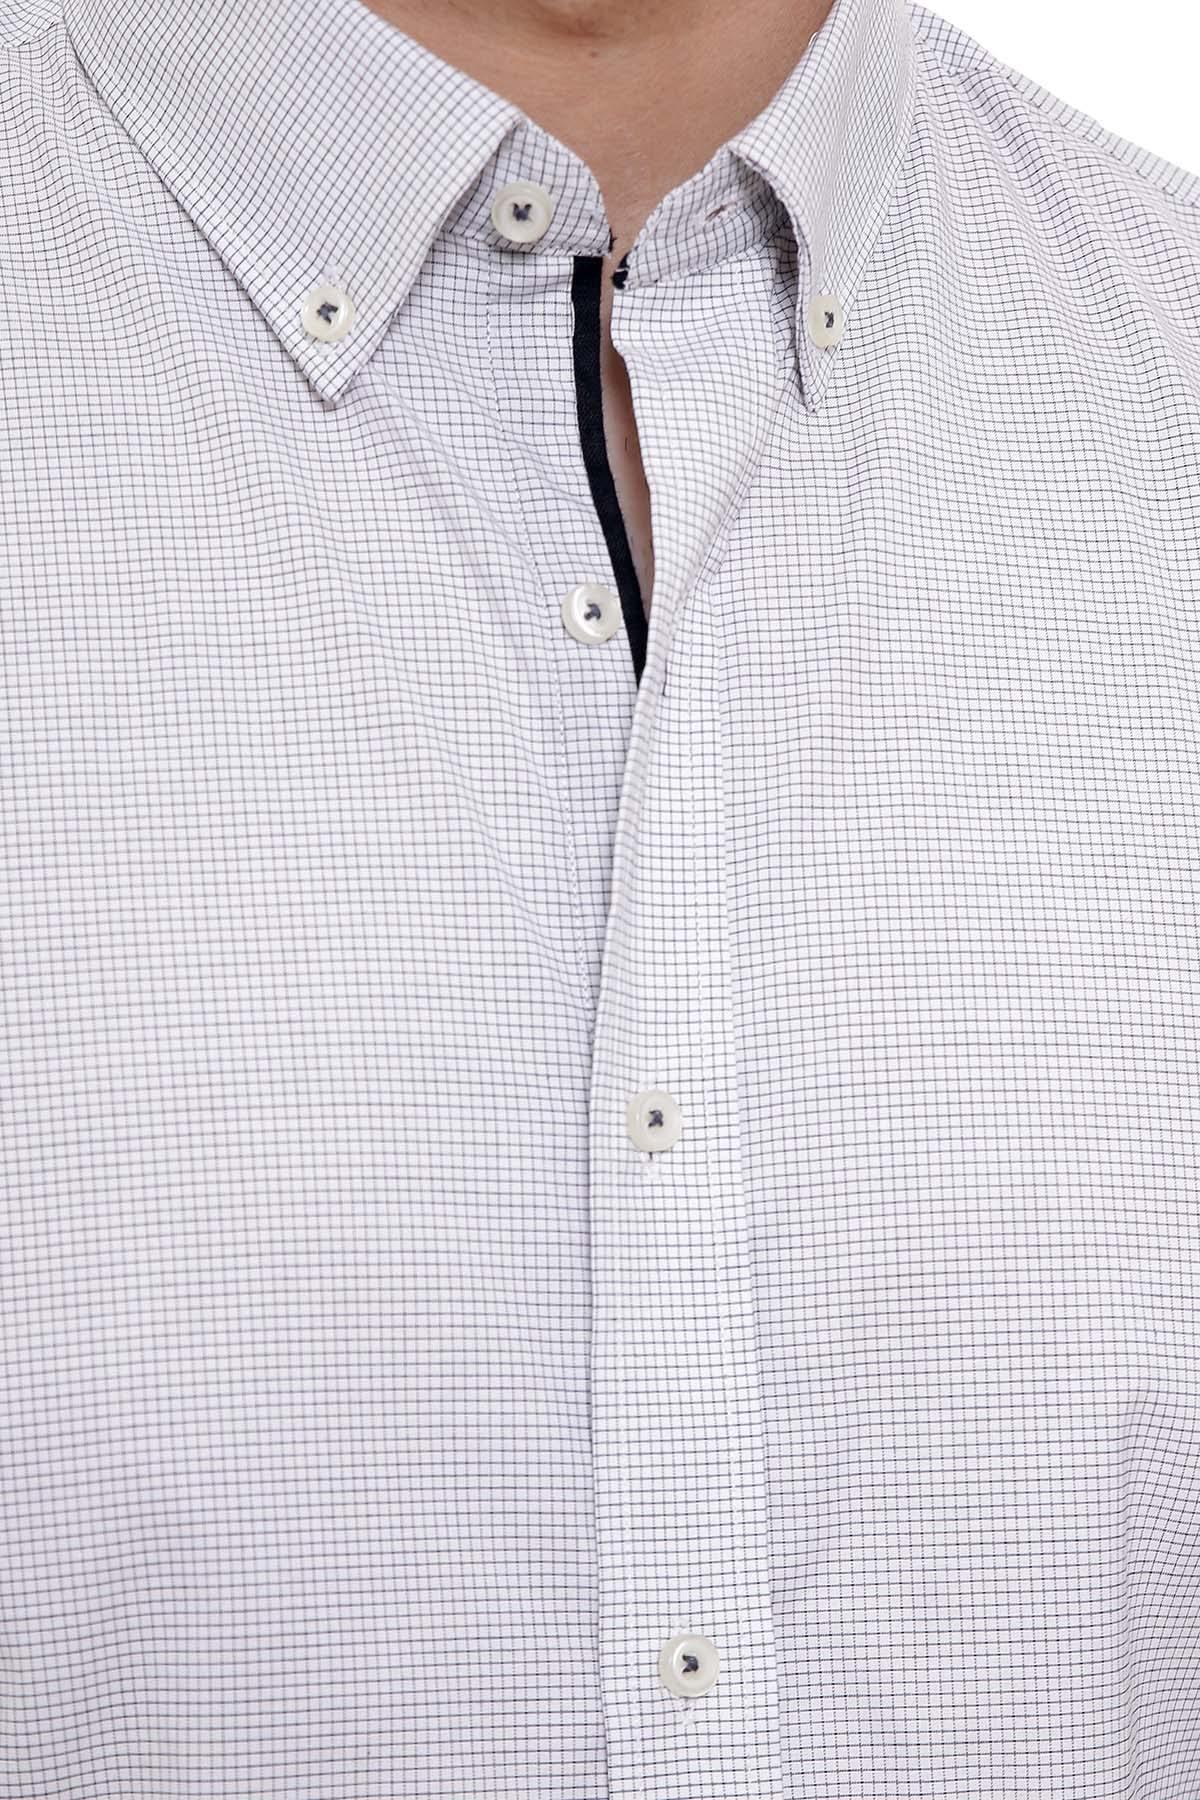 SMART SHIRTS BUTTON DOWN FULL SLEEVE LIGHT BEIGE at Charcoal Clothing